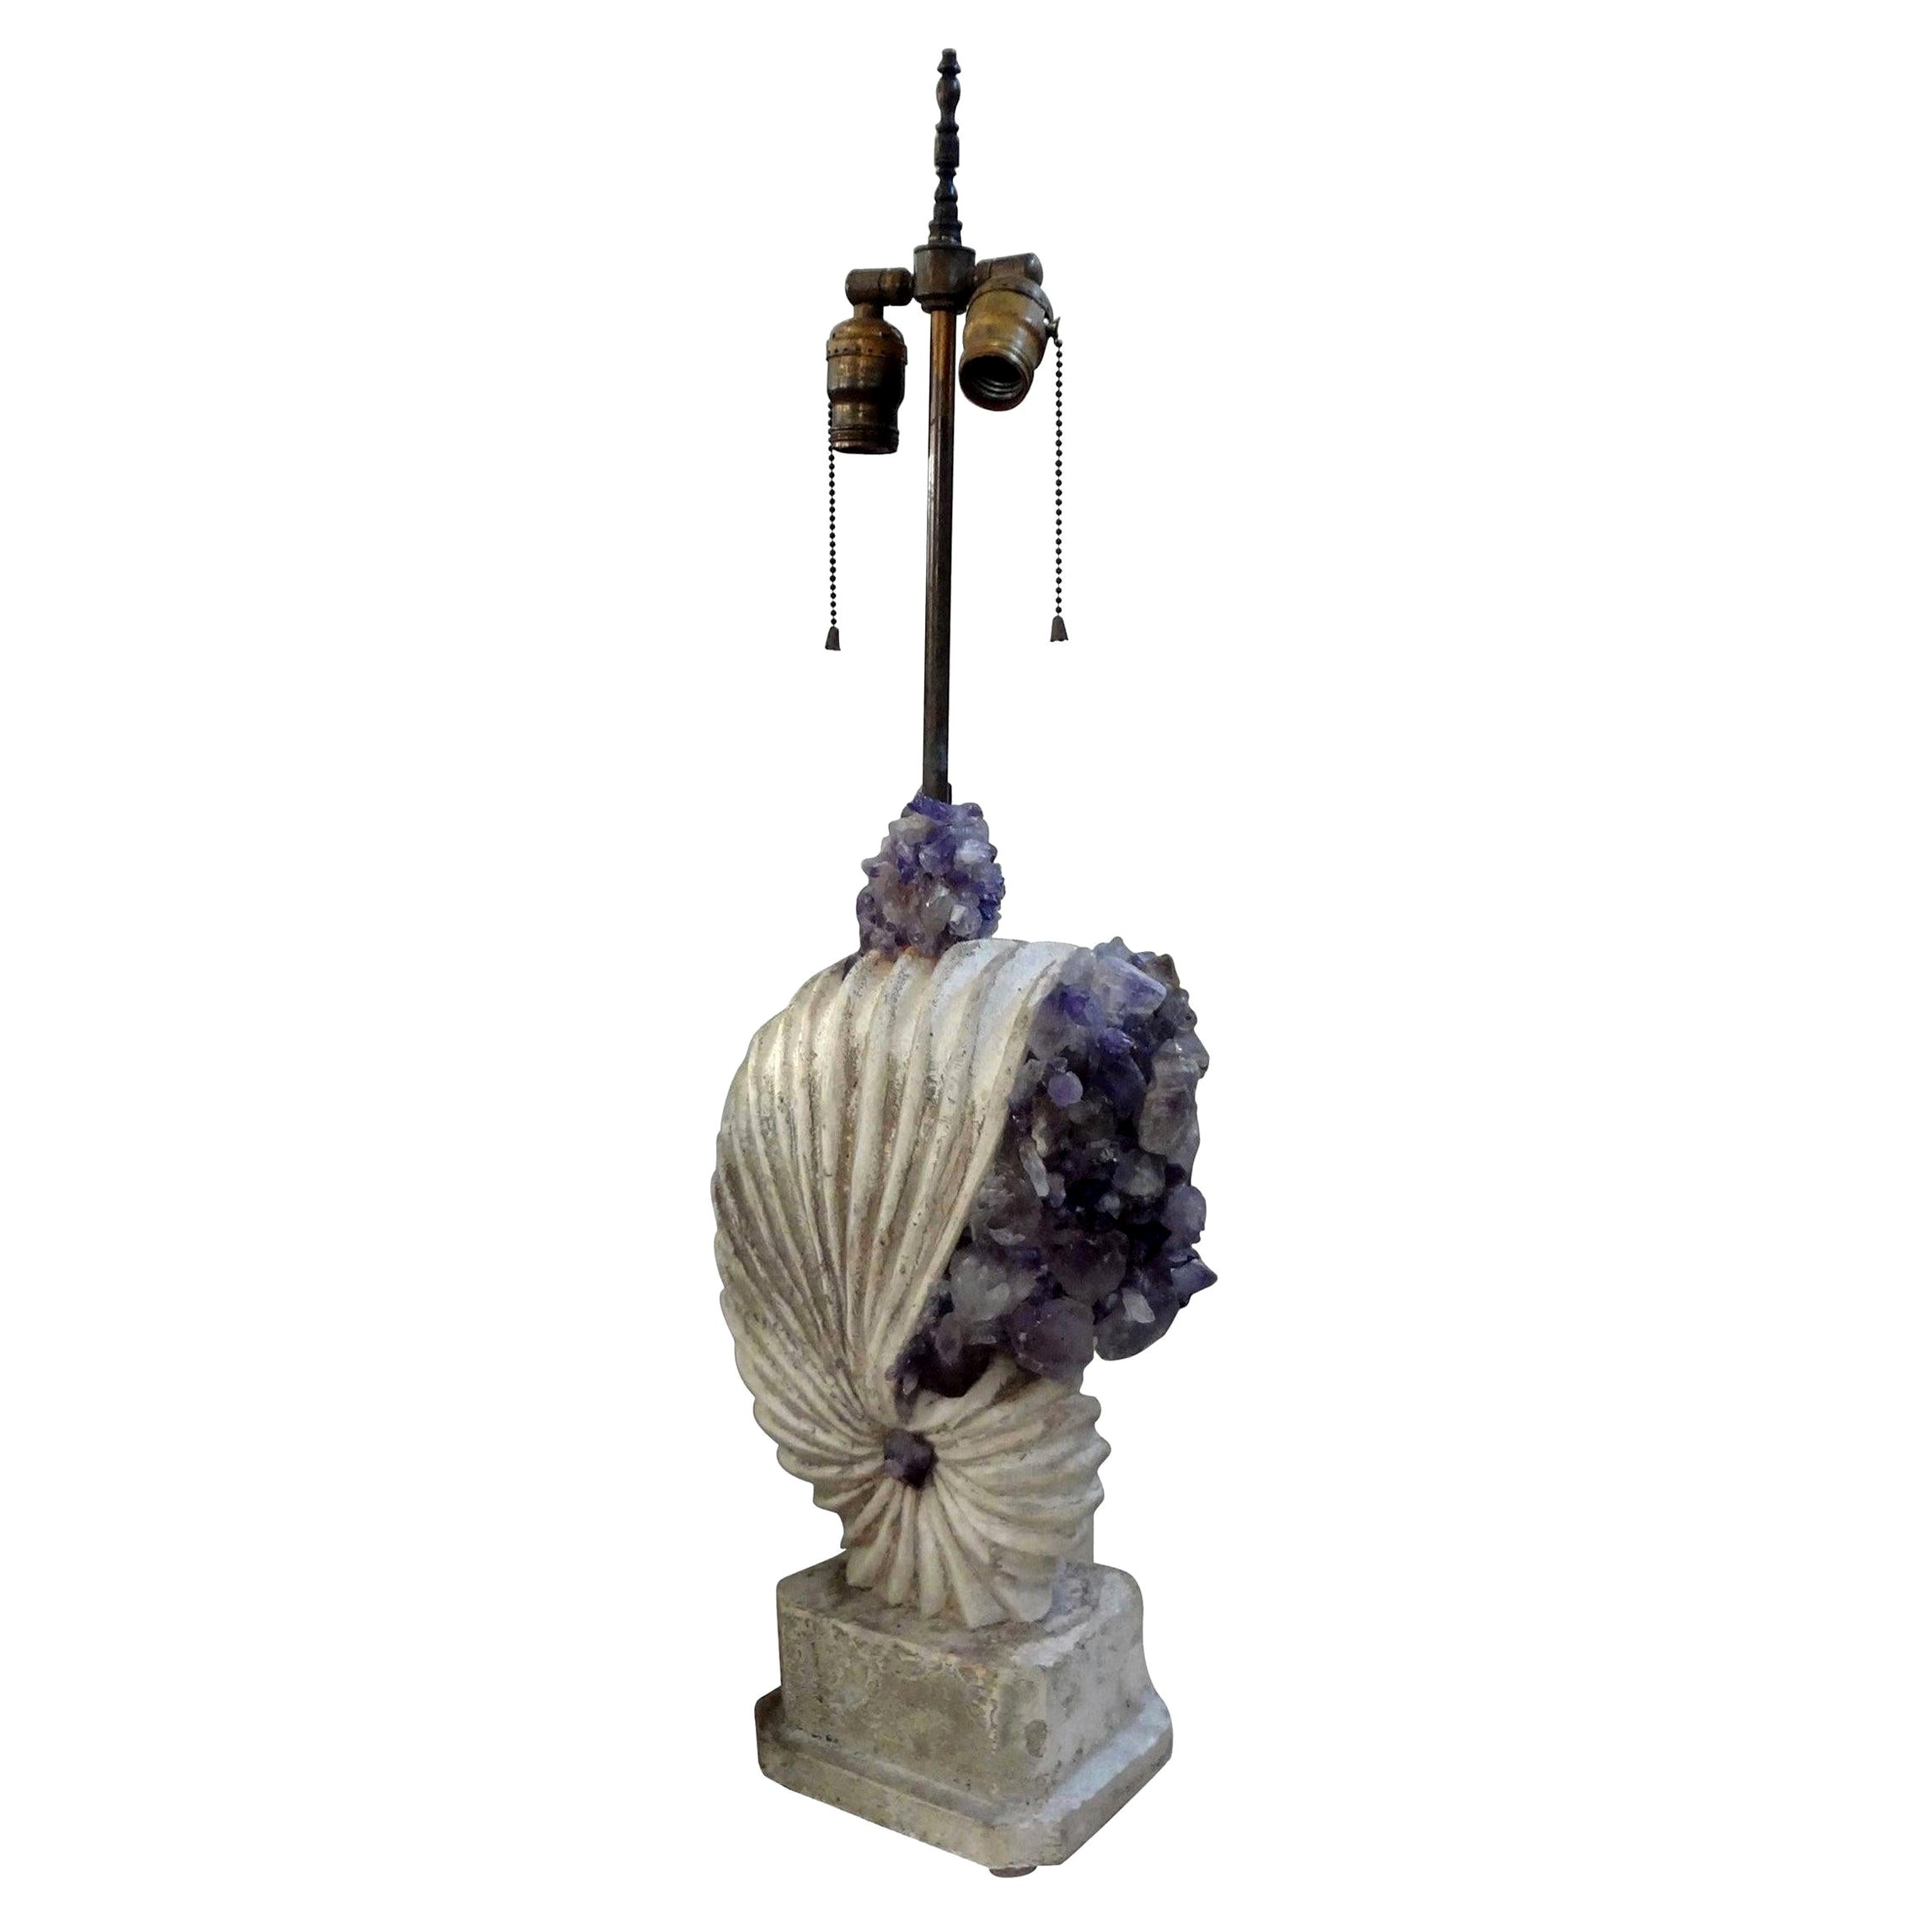 Stone Nautilus Shell Lamp Encrusted with Amethyst Rock Crystals